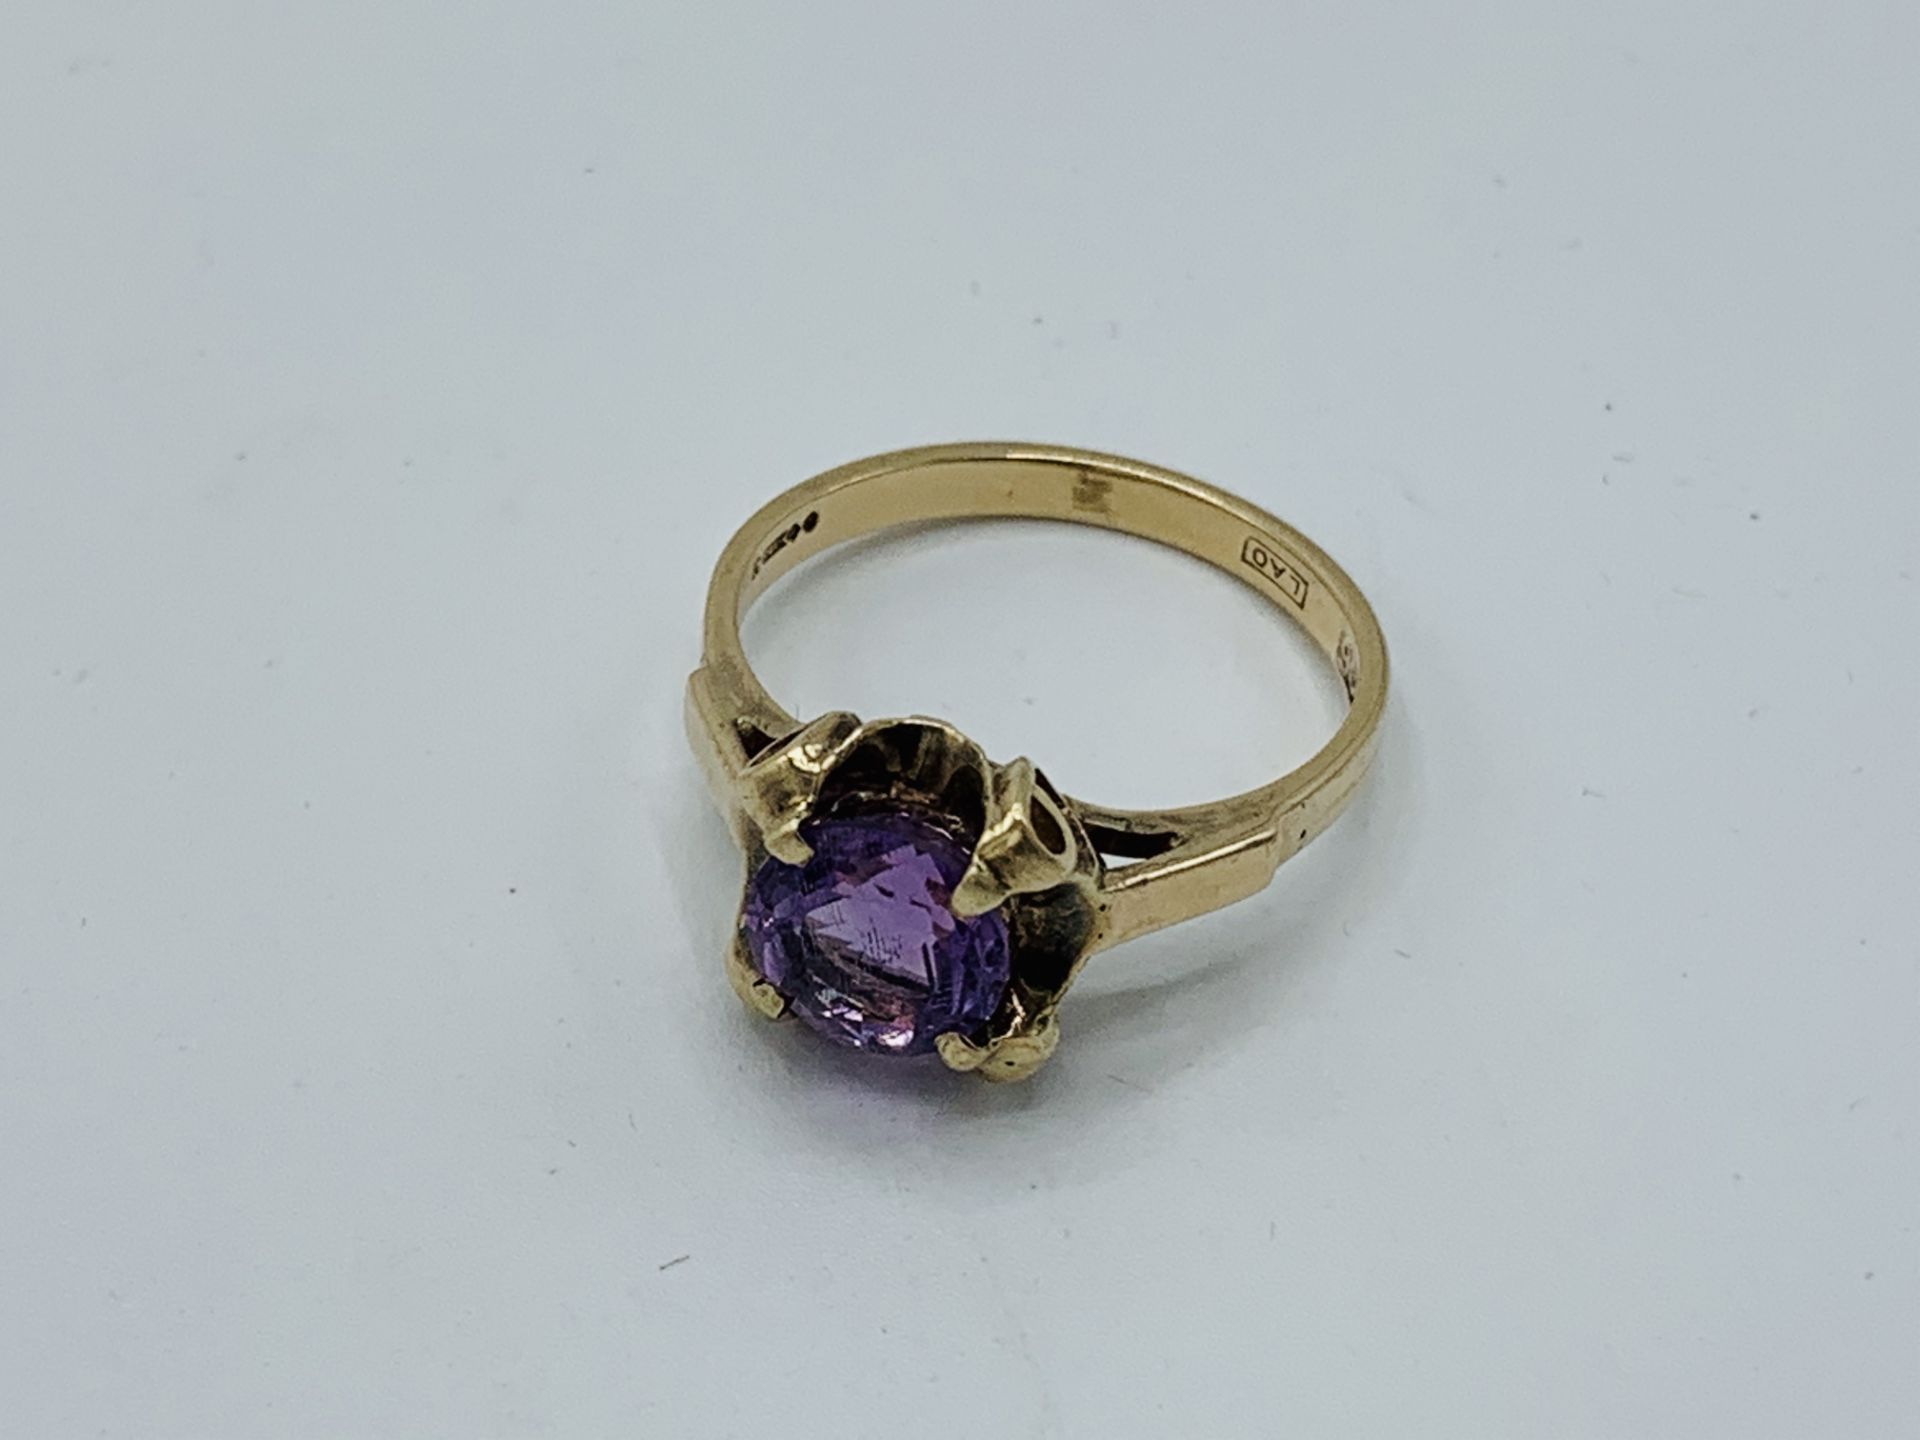 9ct gold amethyst ring, size N, weight 2.7gms. Estimate £80-100.